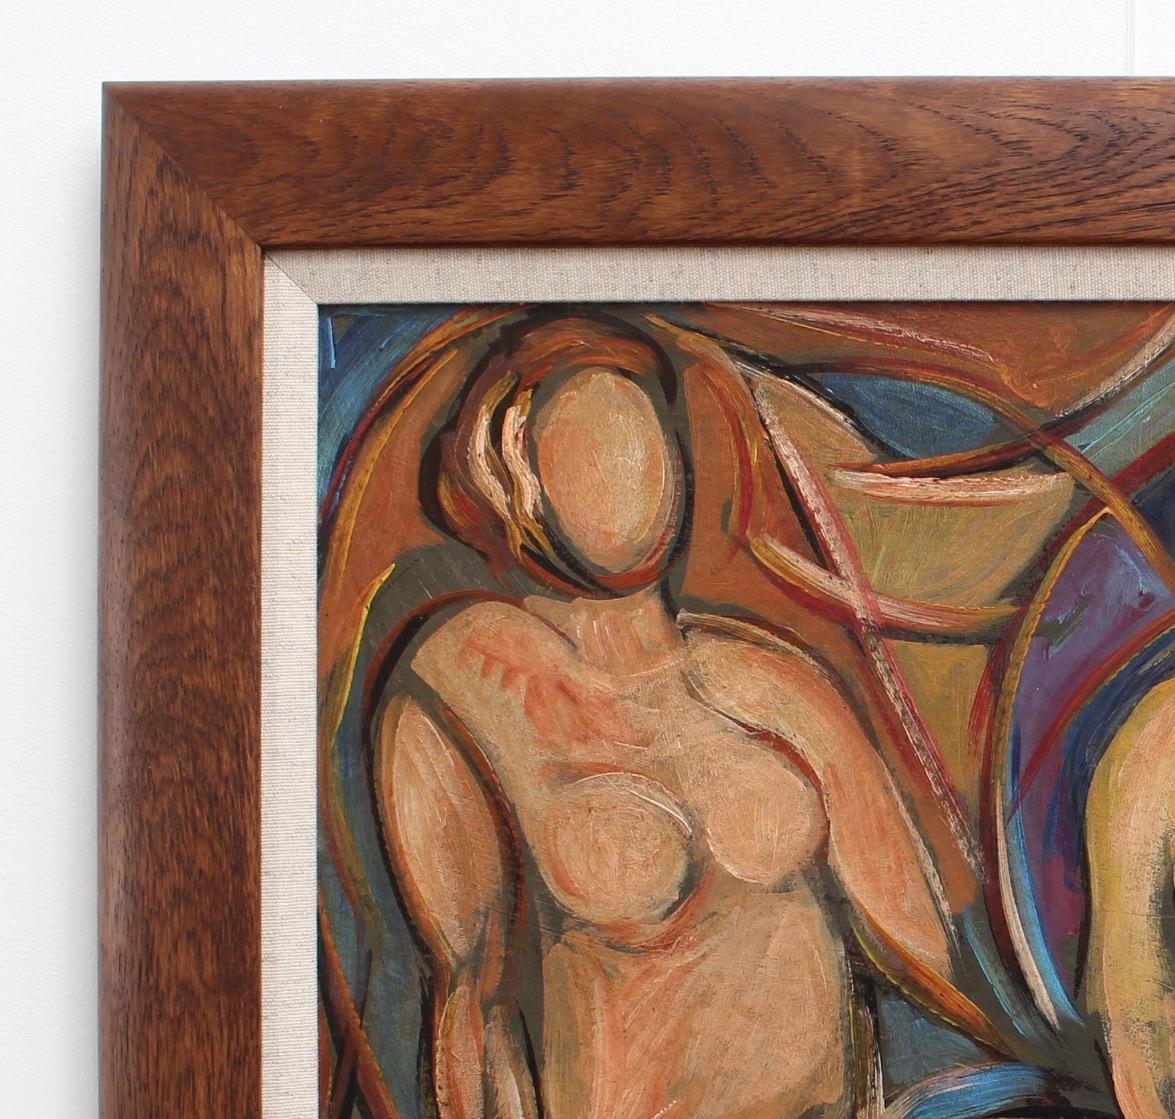 'Nudes in Repose' by STM, Mid-Century Modern Cubist Portrait Painting, Berlin 6